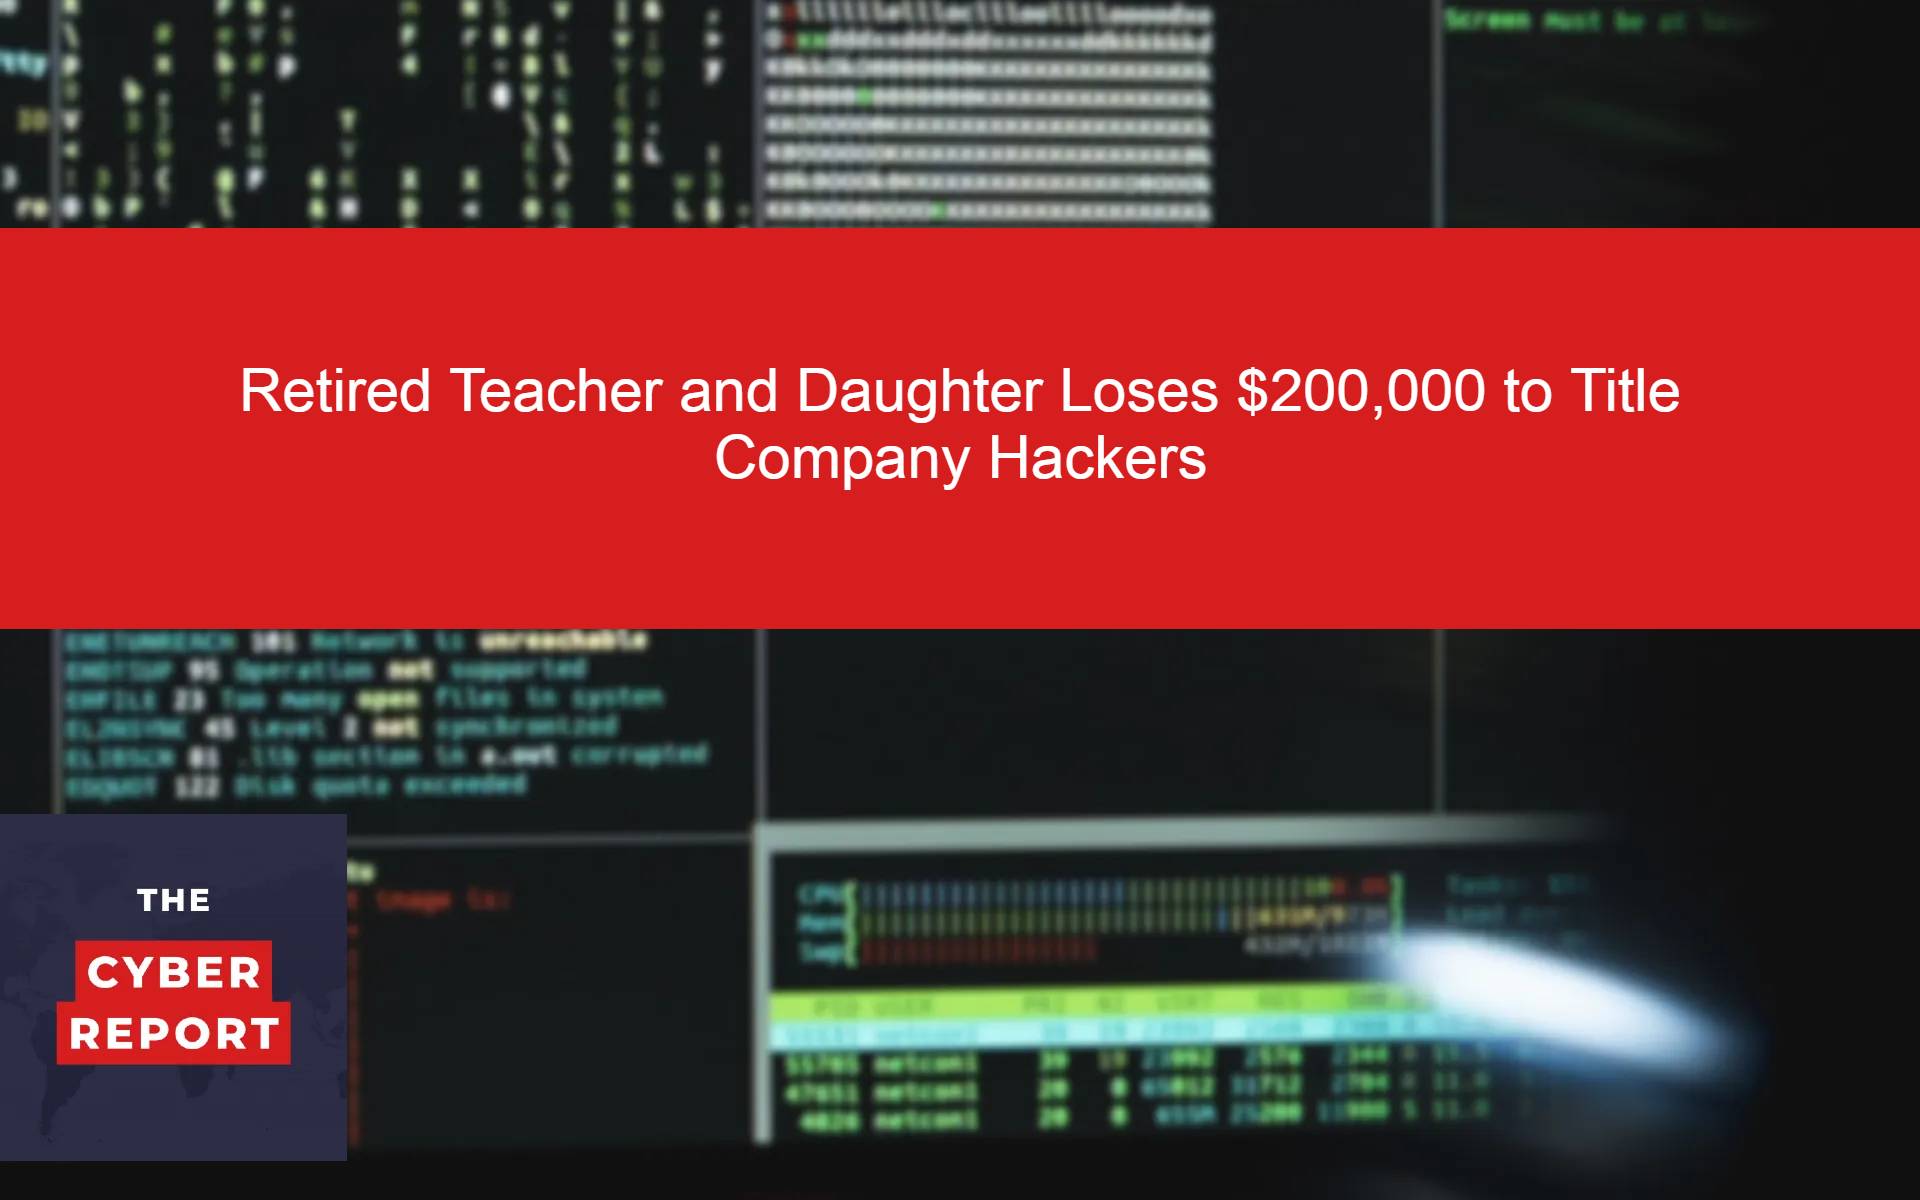 Retired Teacher and Daughter Loses $200,000 to Title Company Hackers